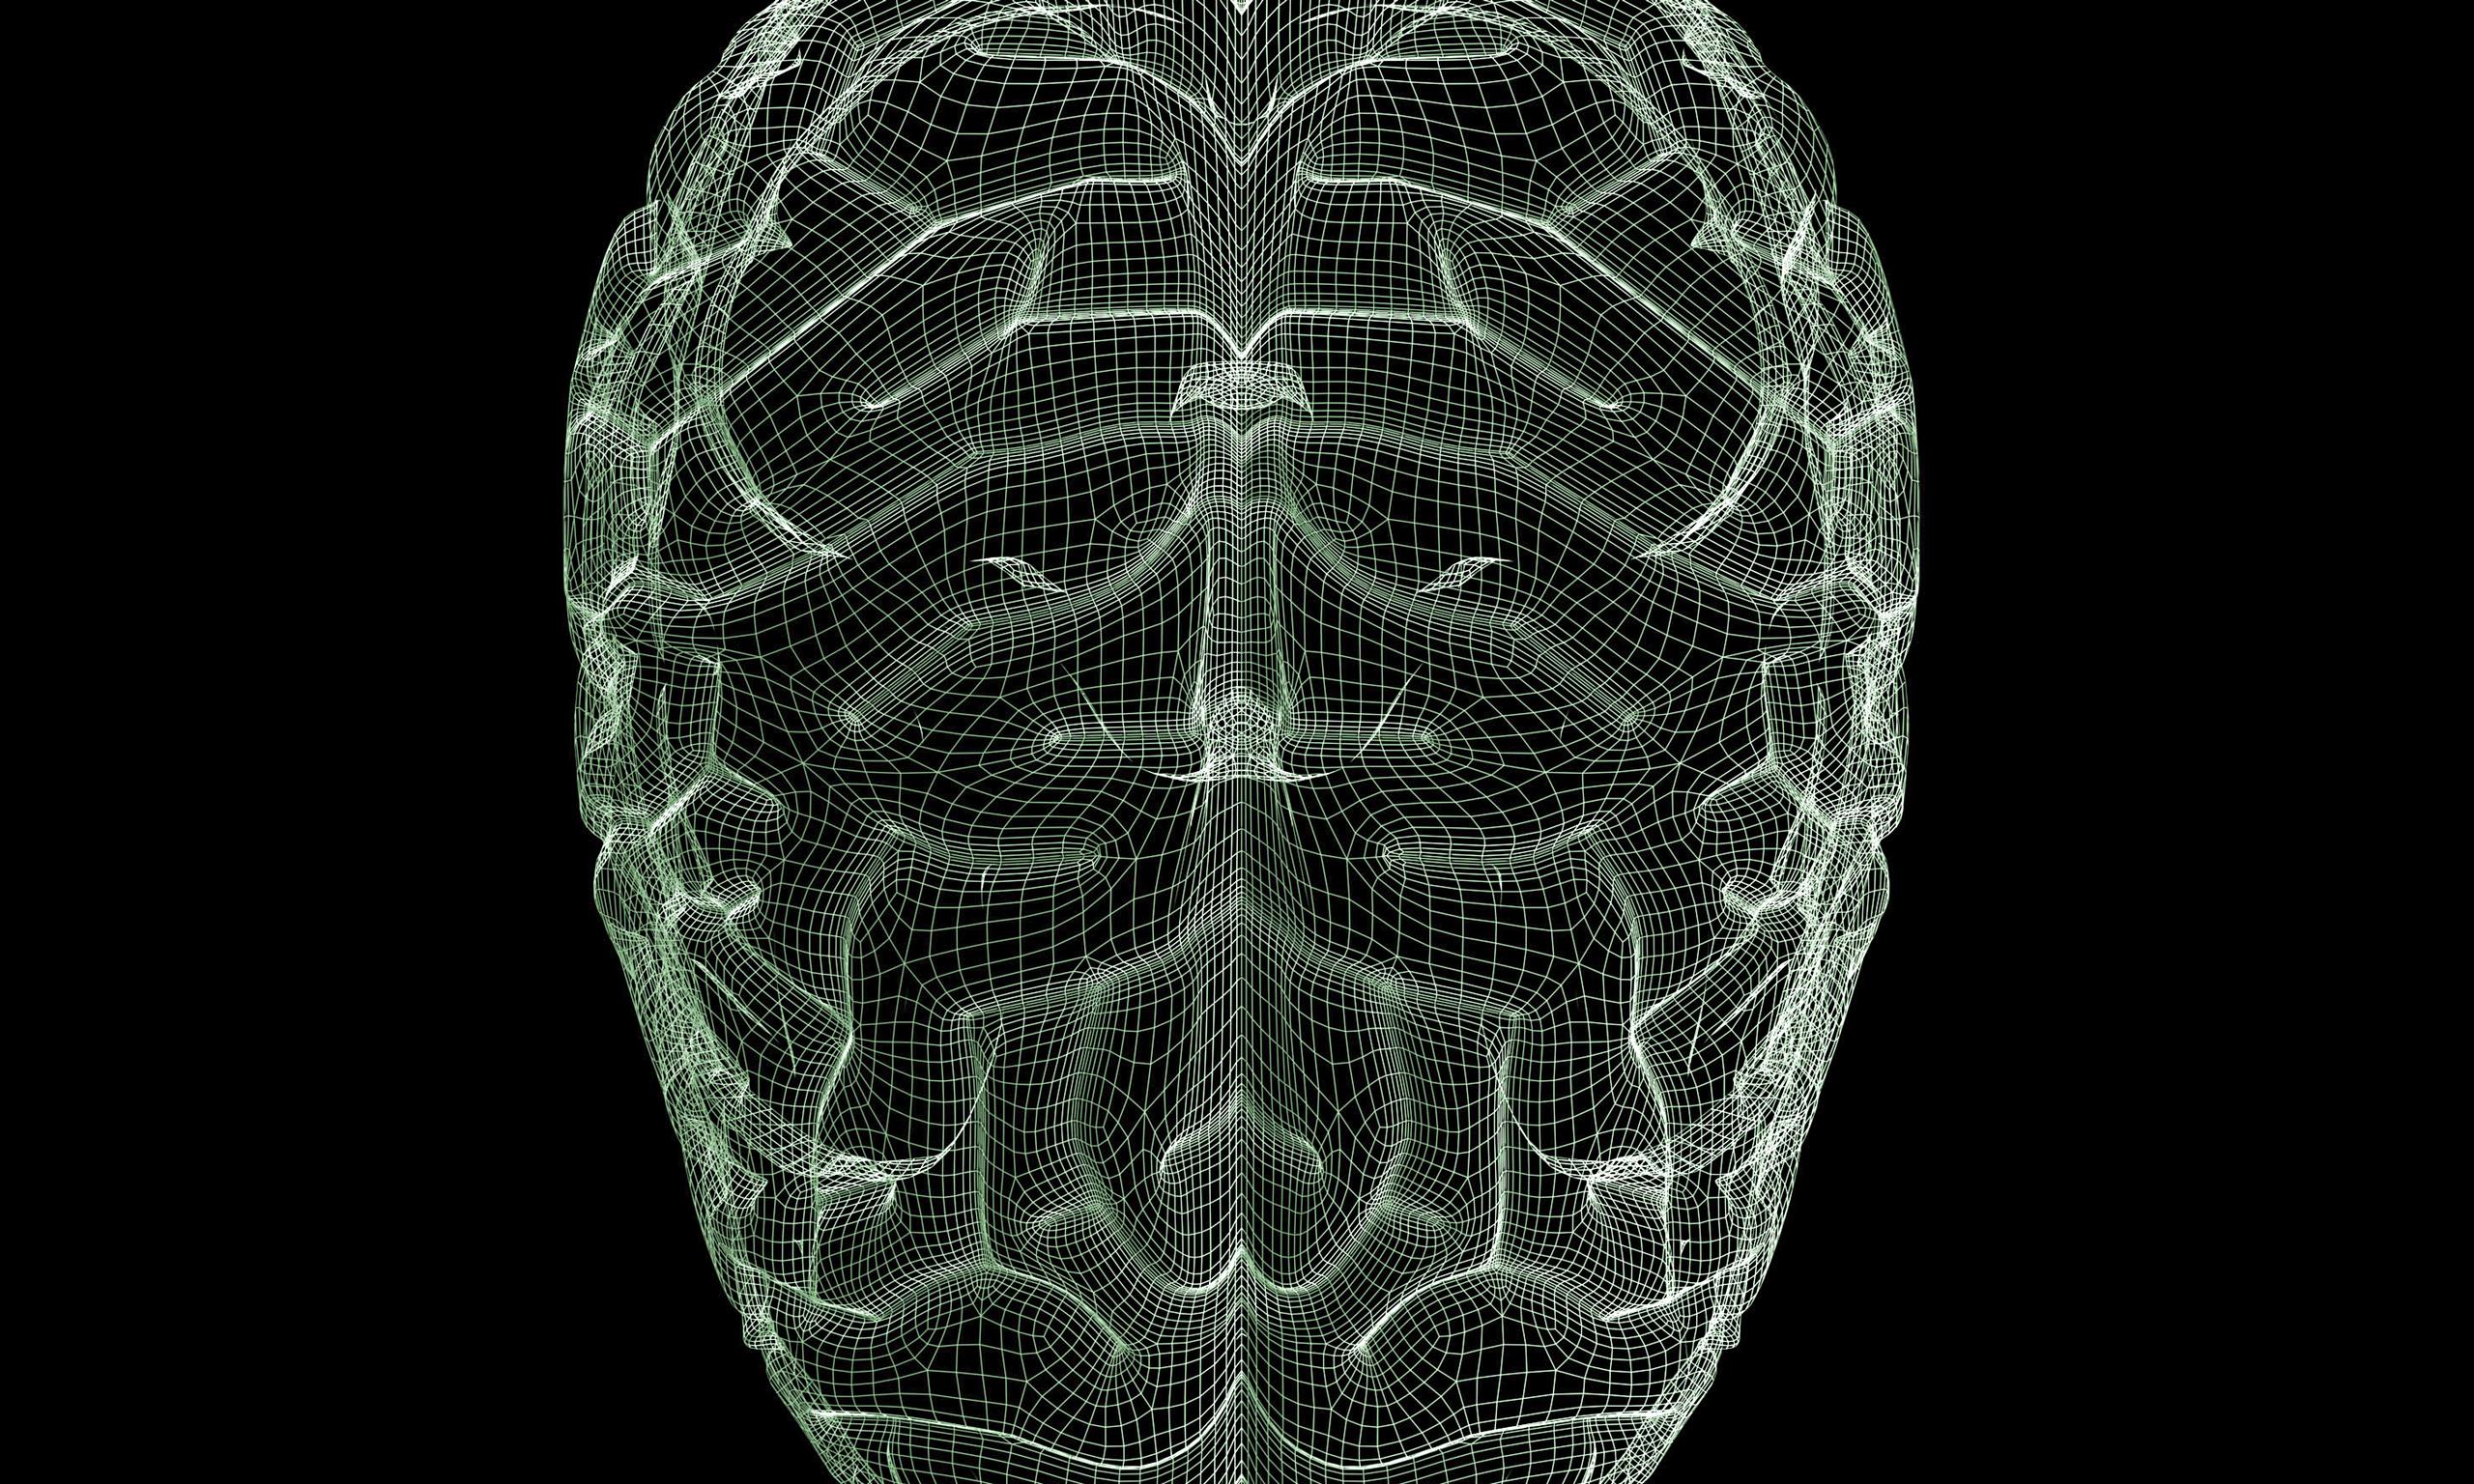 https://naked-science.ru/wp-content/uploads/2016/04/article_Human-brain-wireframe-014.jpg